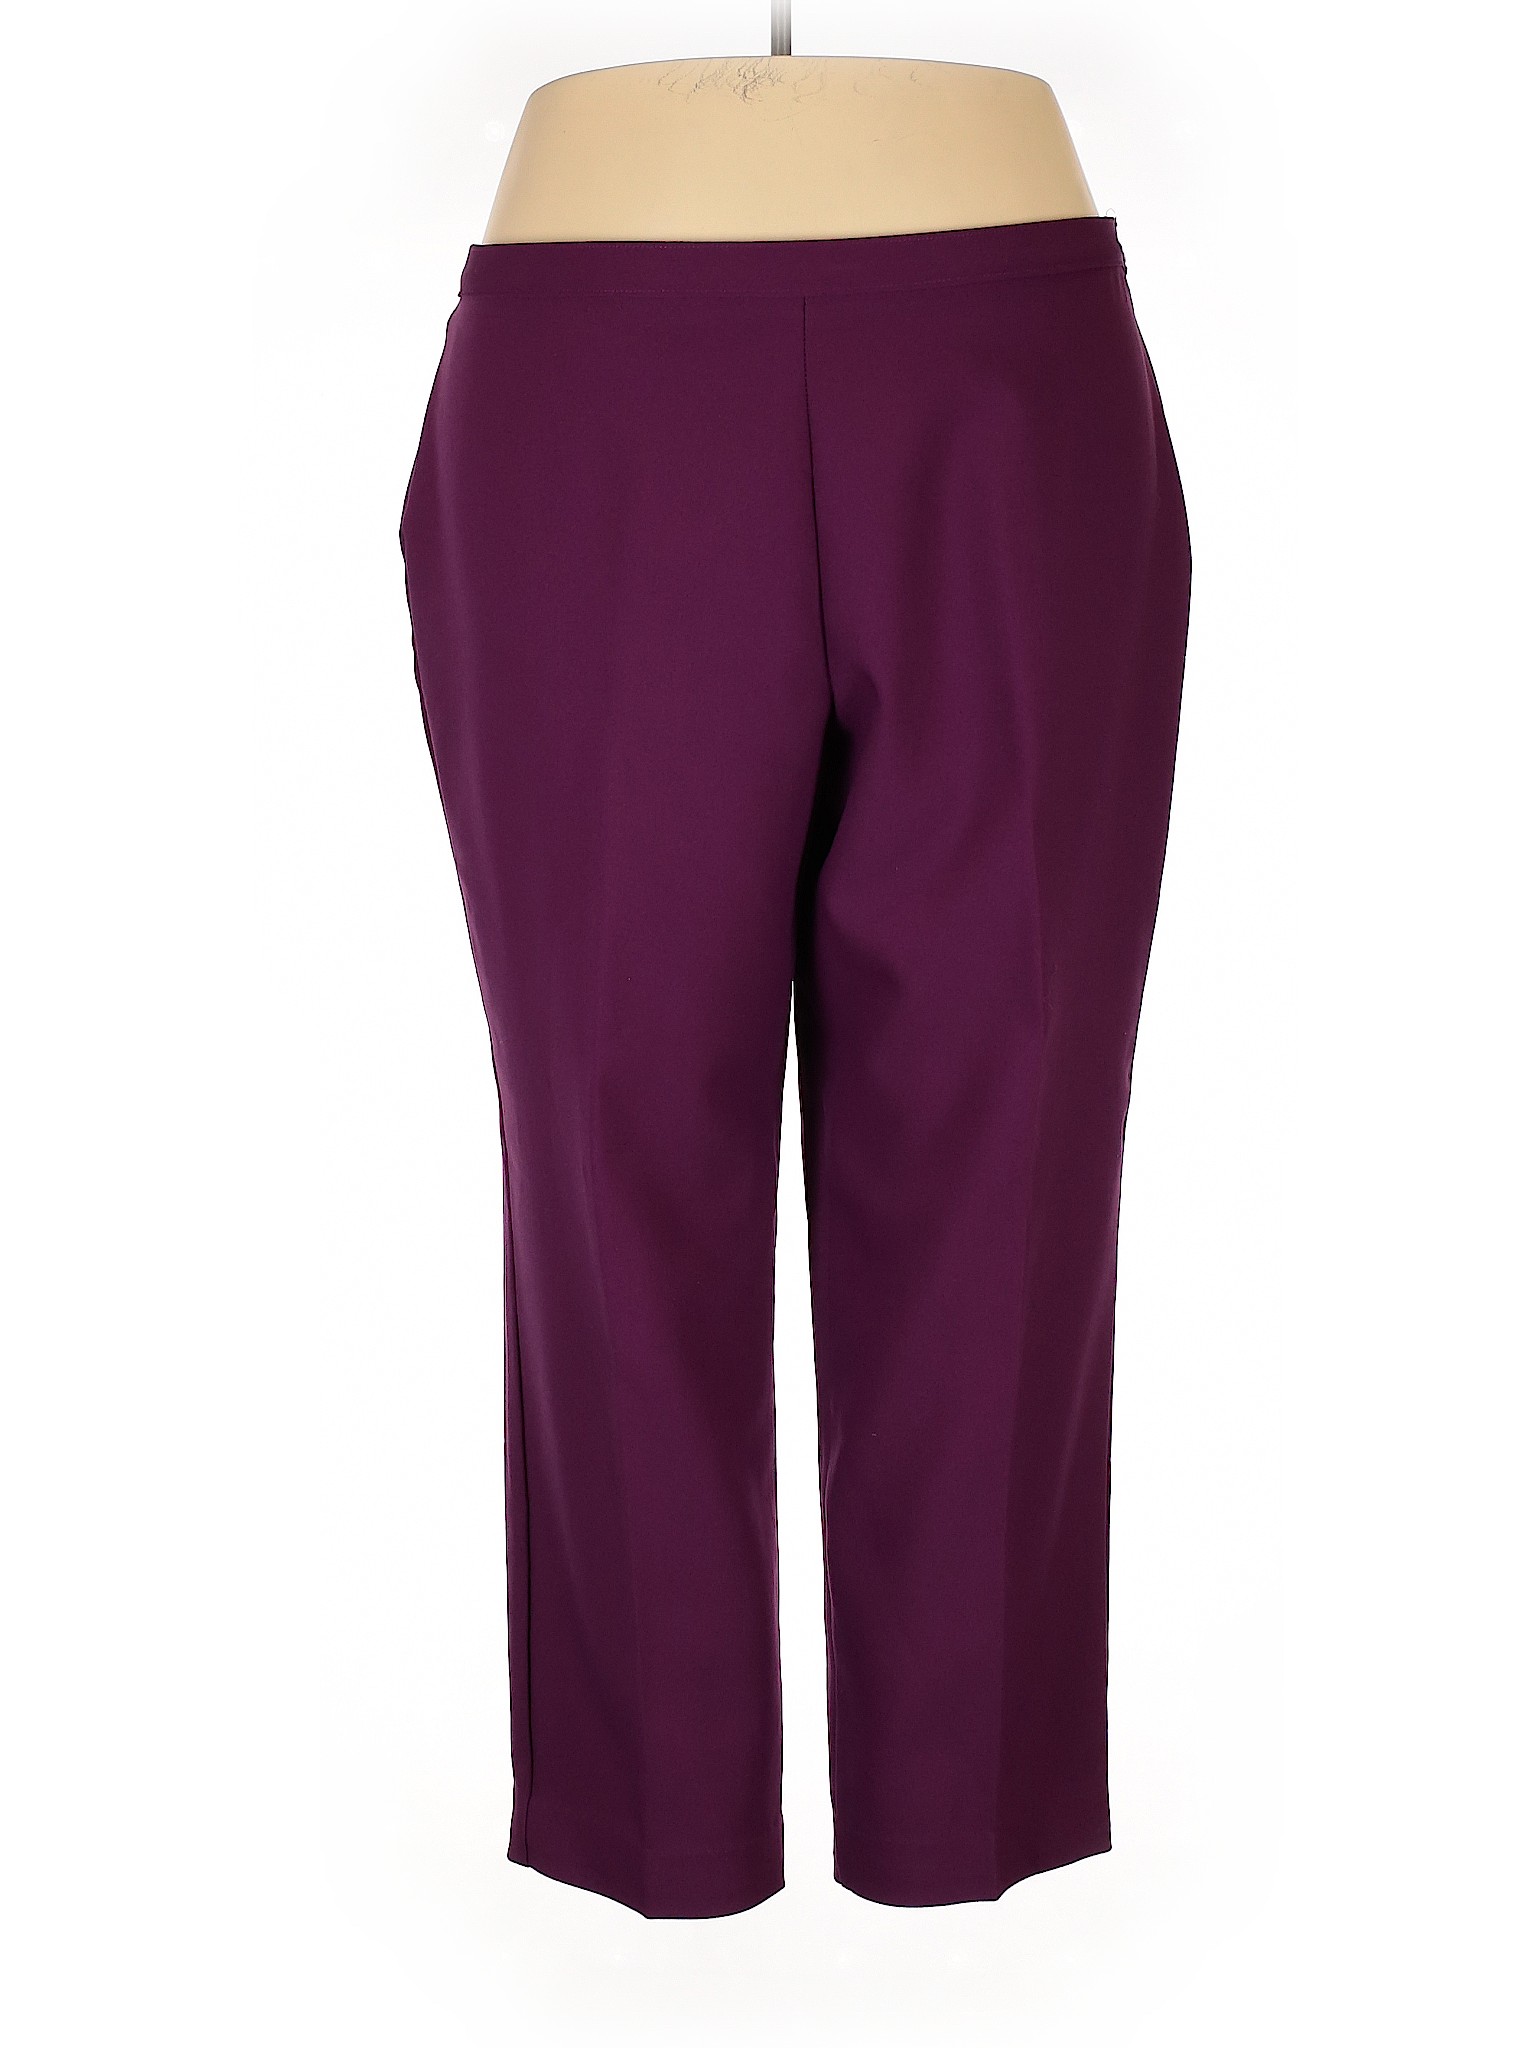 Bend Over 100% Polyester Solid Purple Dress Pants Size 28 (Plus) - 53% ...